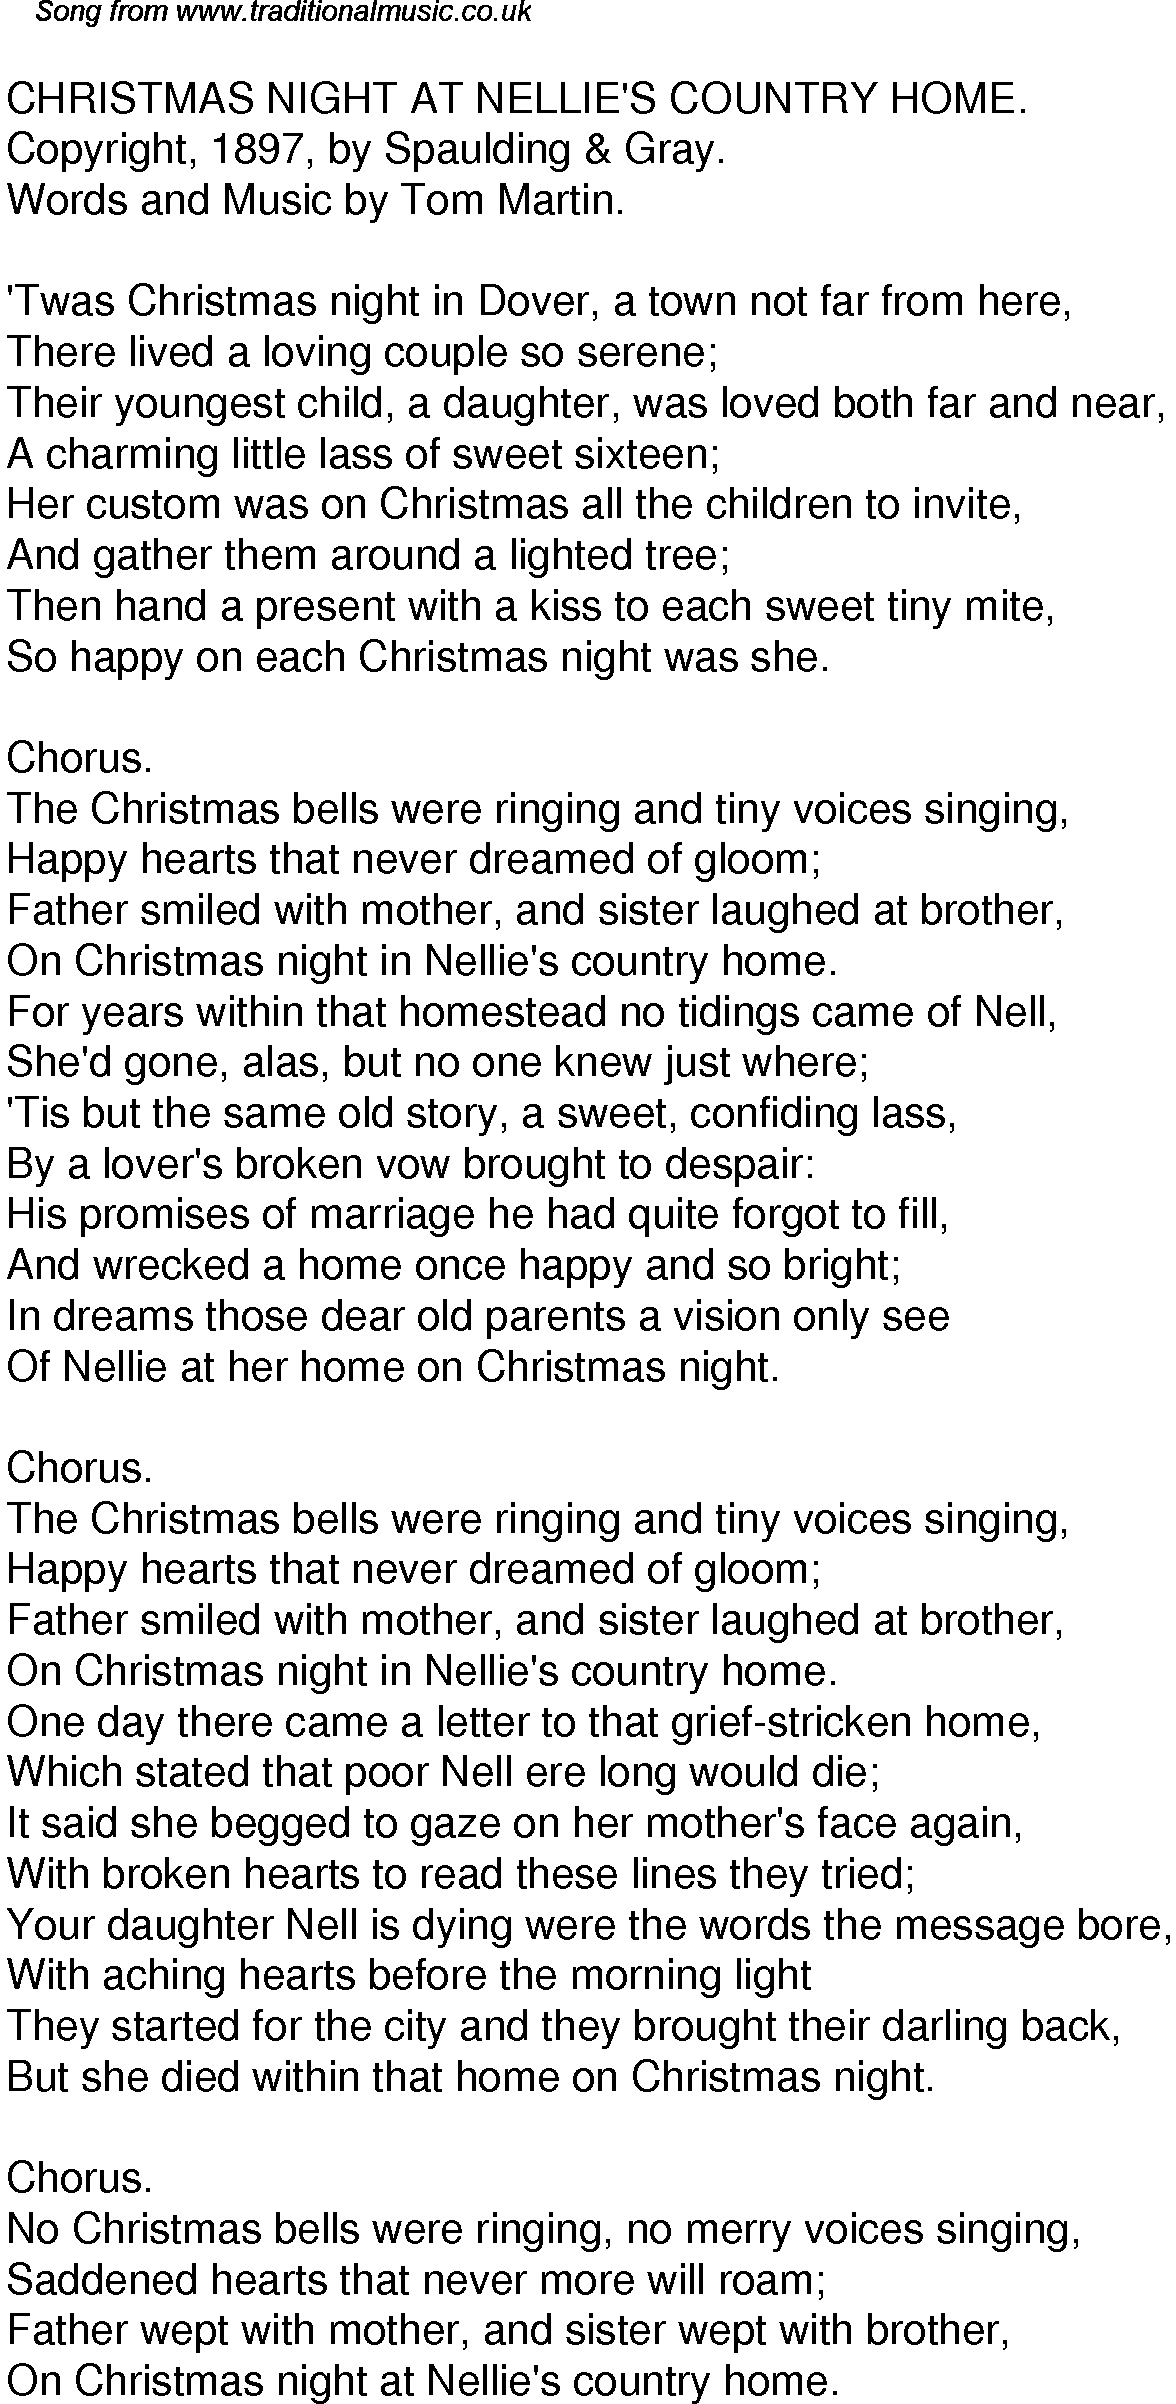 Old Time Song Lyrics for 55 Christmas Night At Nellies Country Home